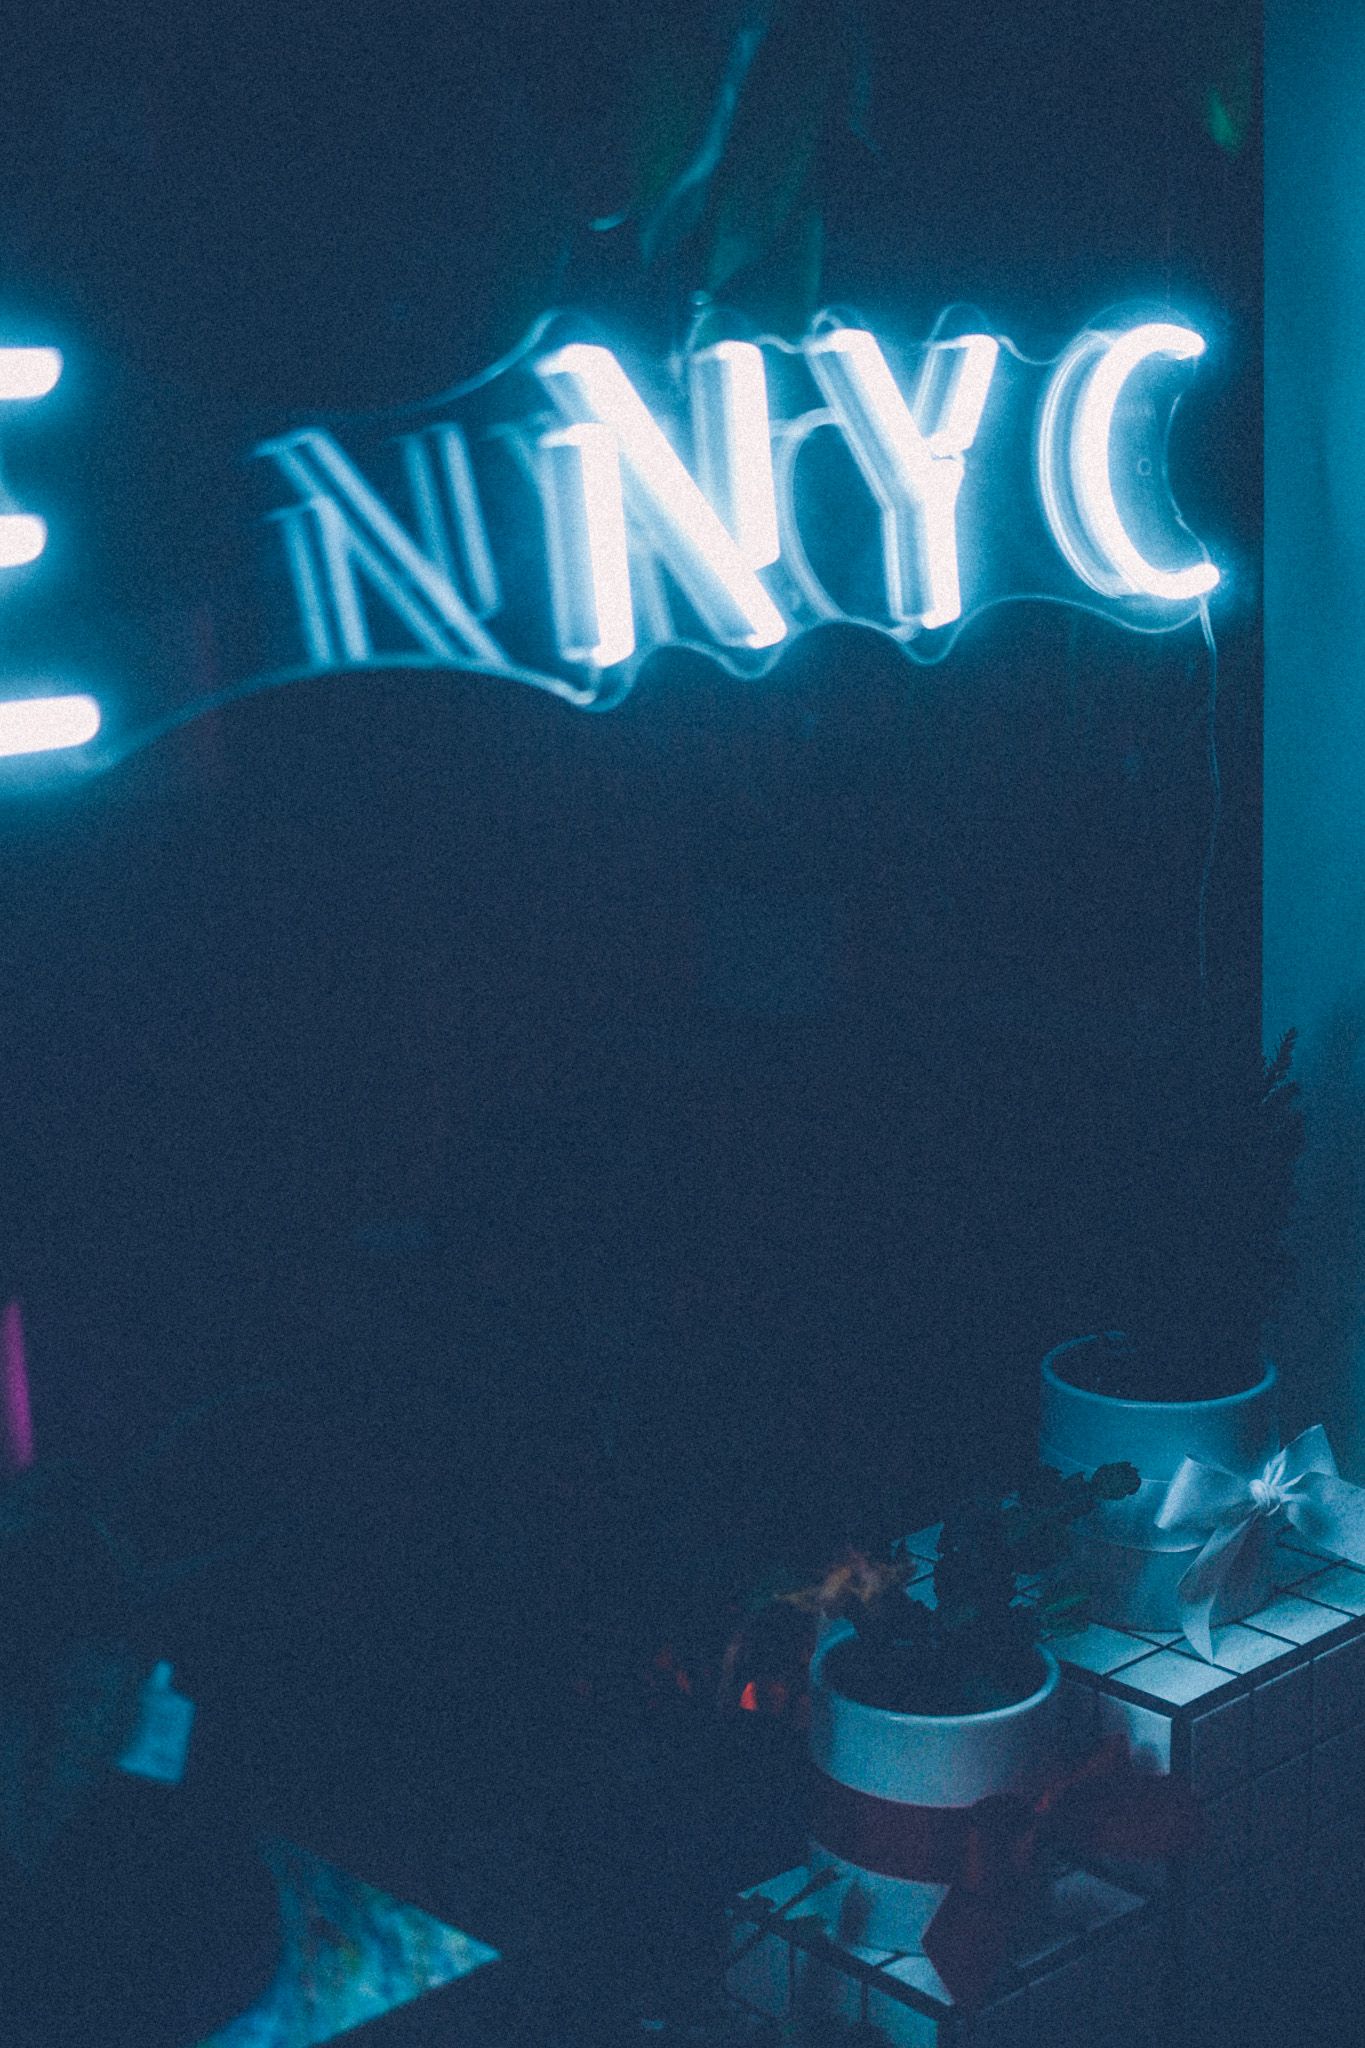 A white-blue neon sign saying NYC hangs in a dark store window.